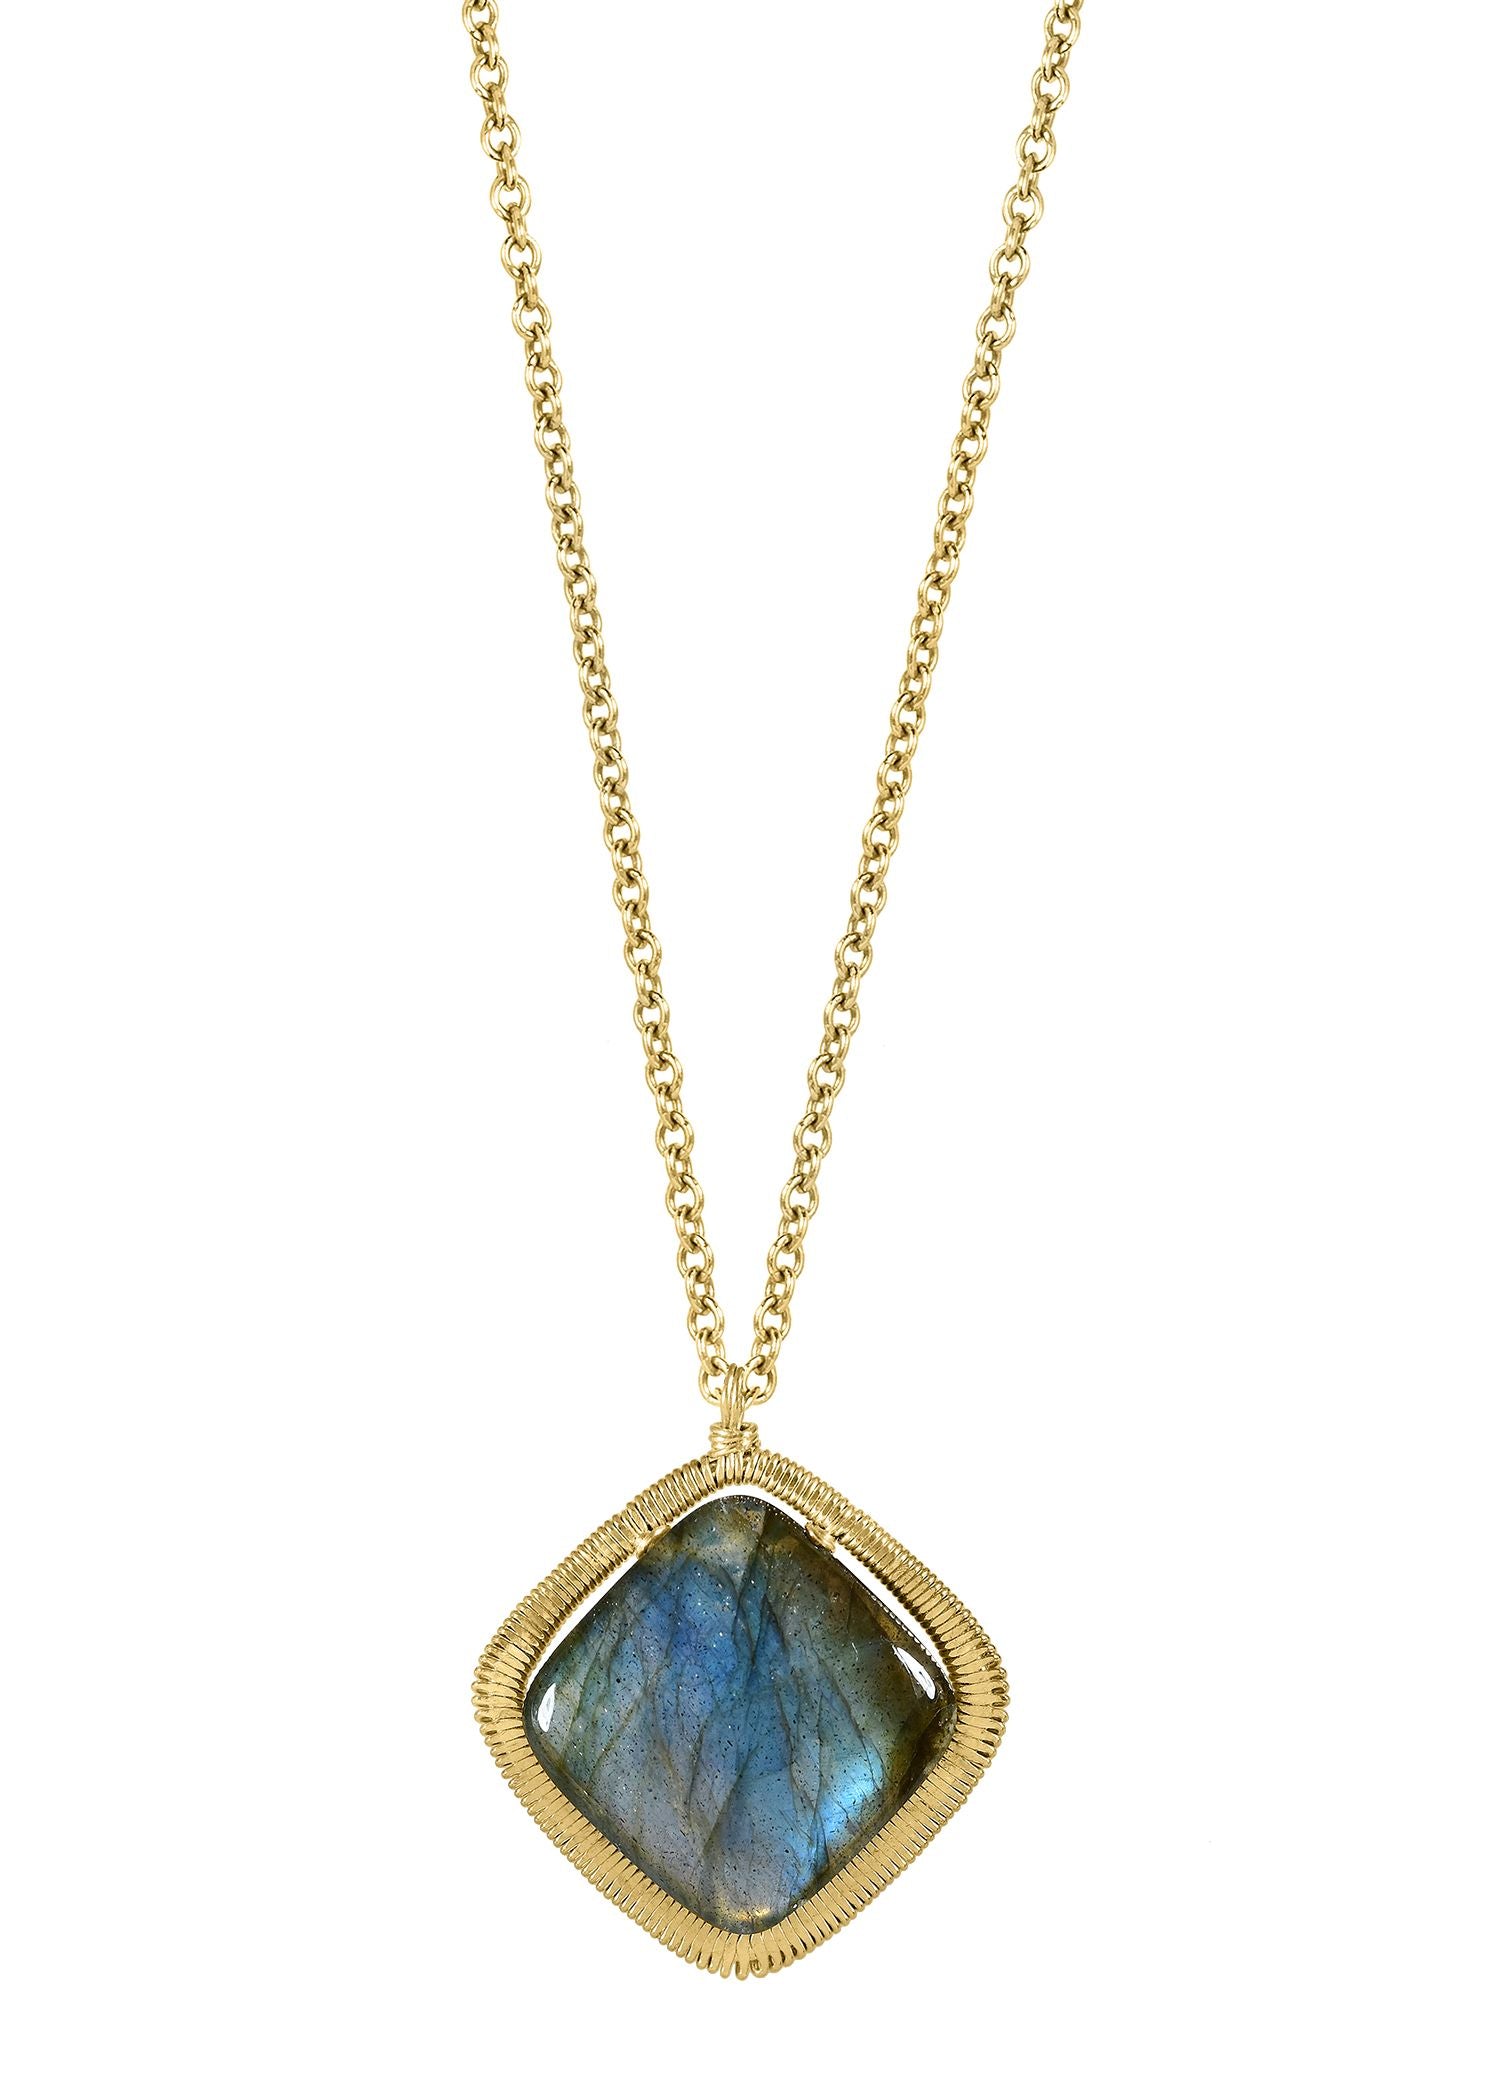 Labradorite 14k gold fill Necklace measures 17-1/4" in length Pendant measures 13/16" in length and 13/16" in width Handmade in our Los Angeles studio